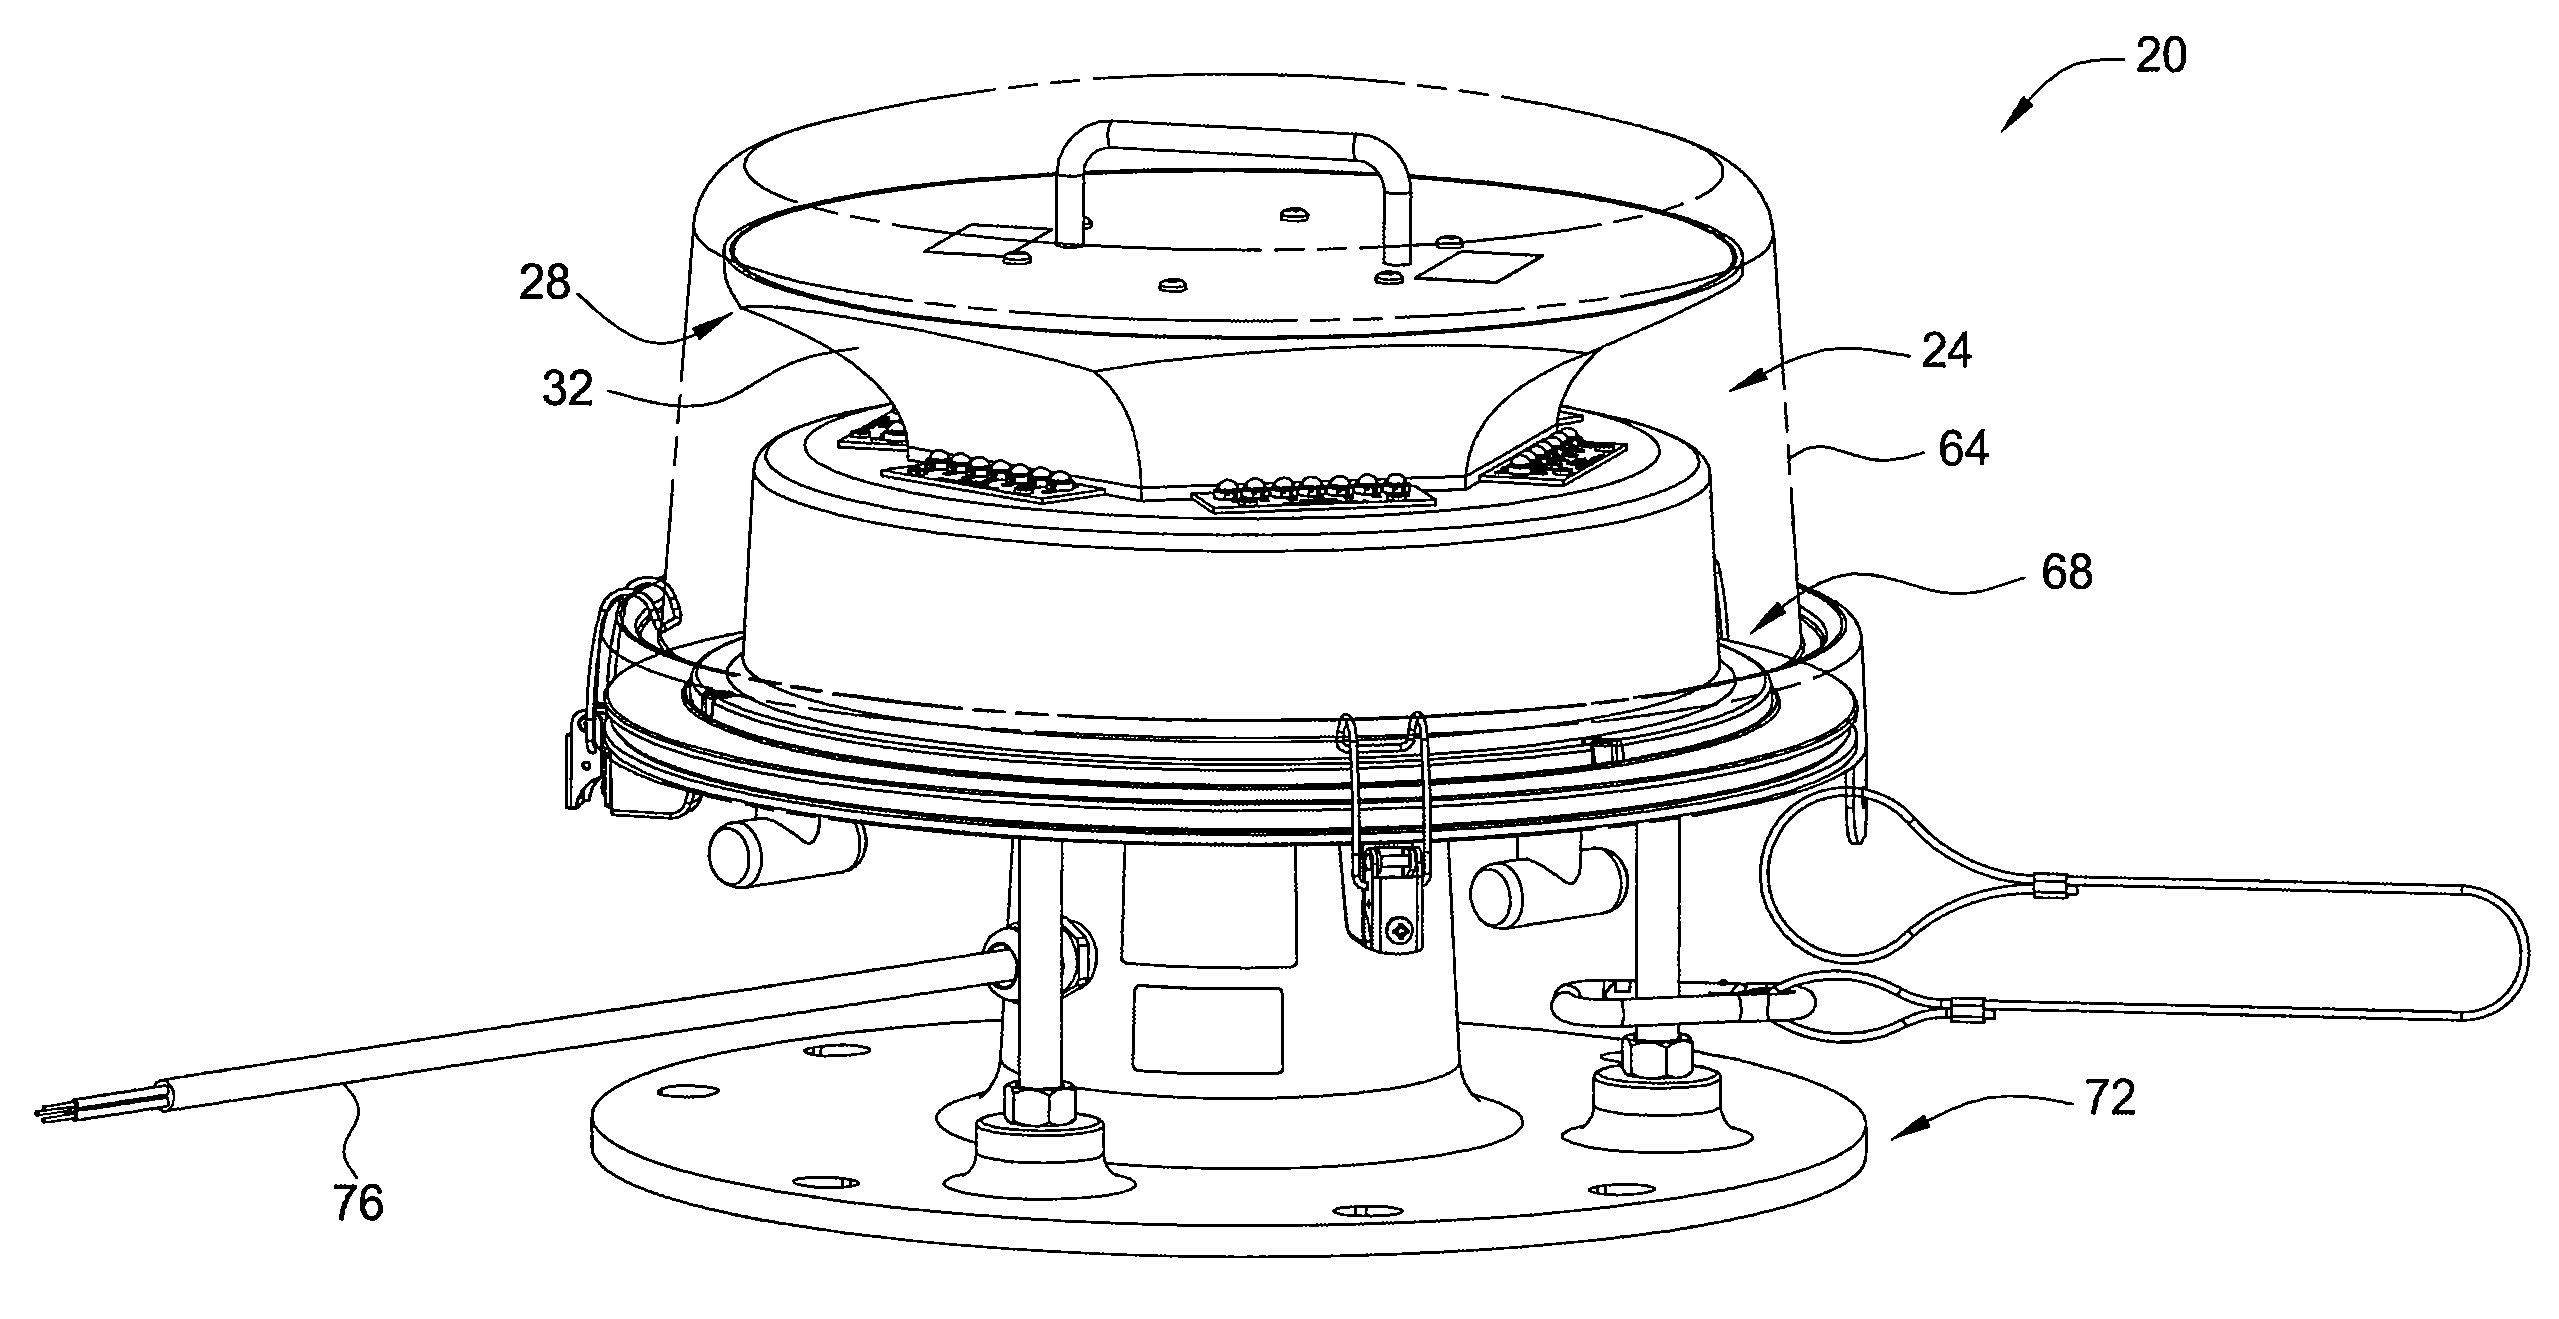 Beacon light with reflector and light emitting diodes